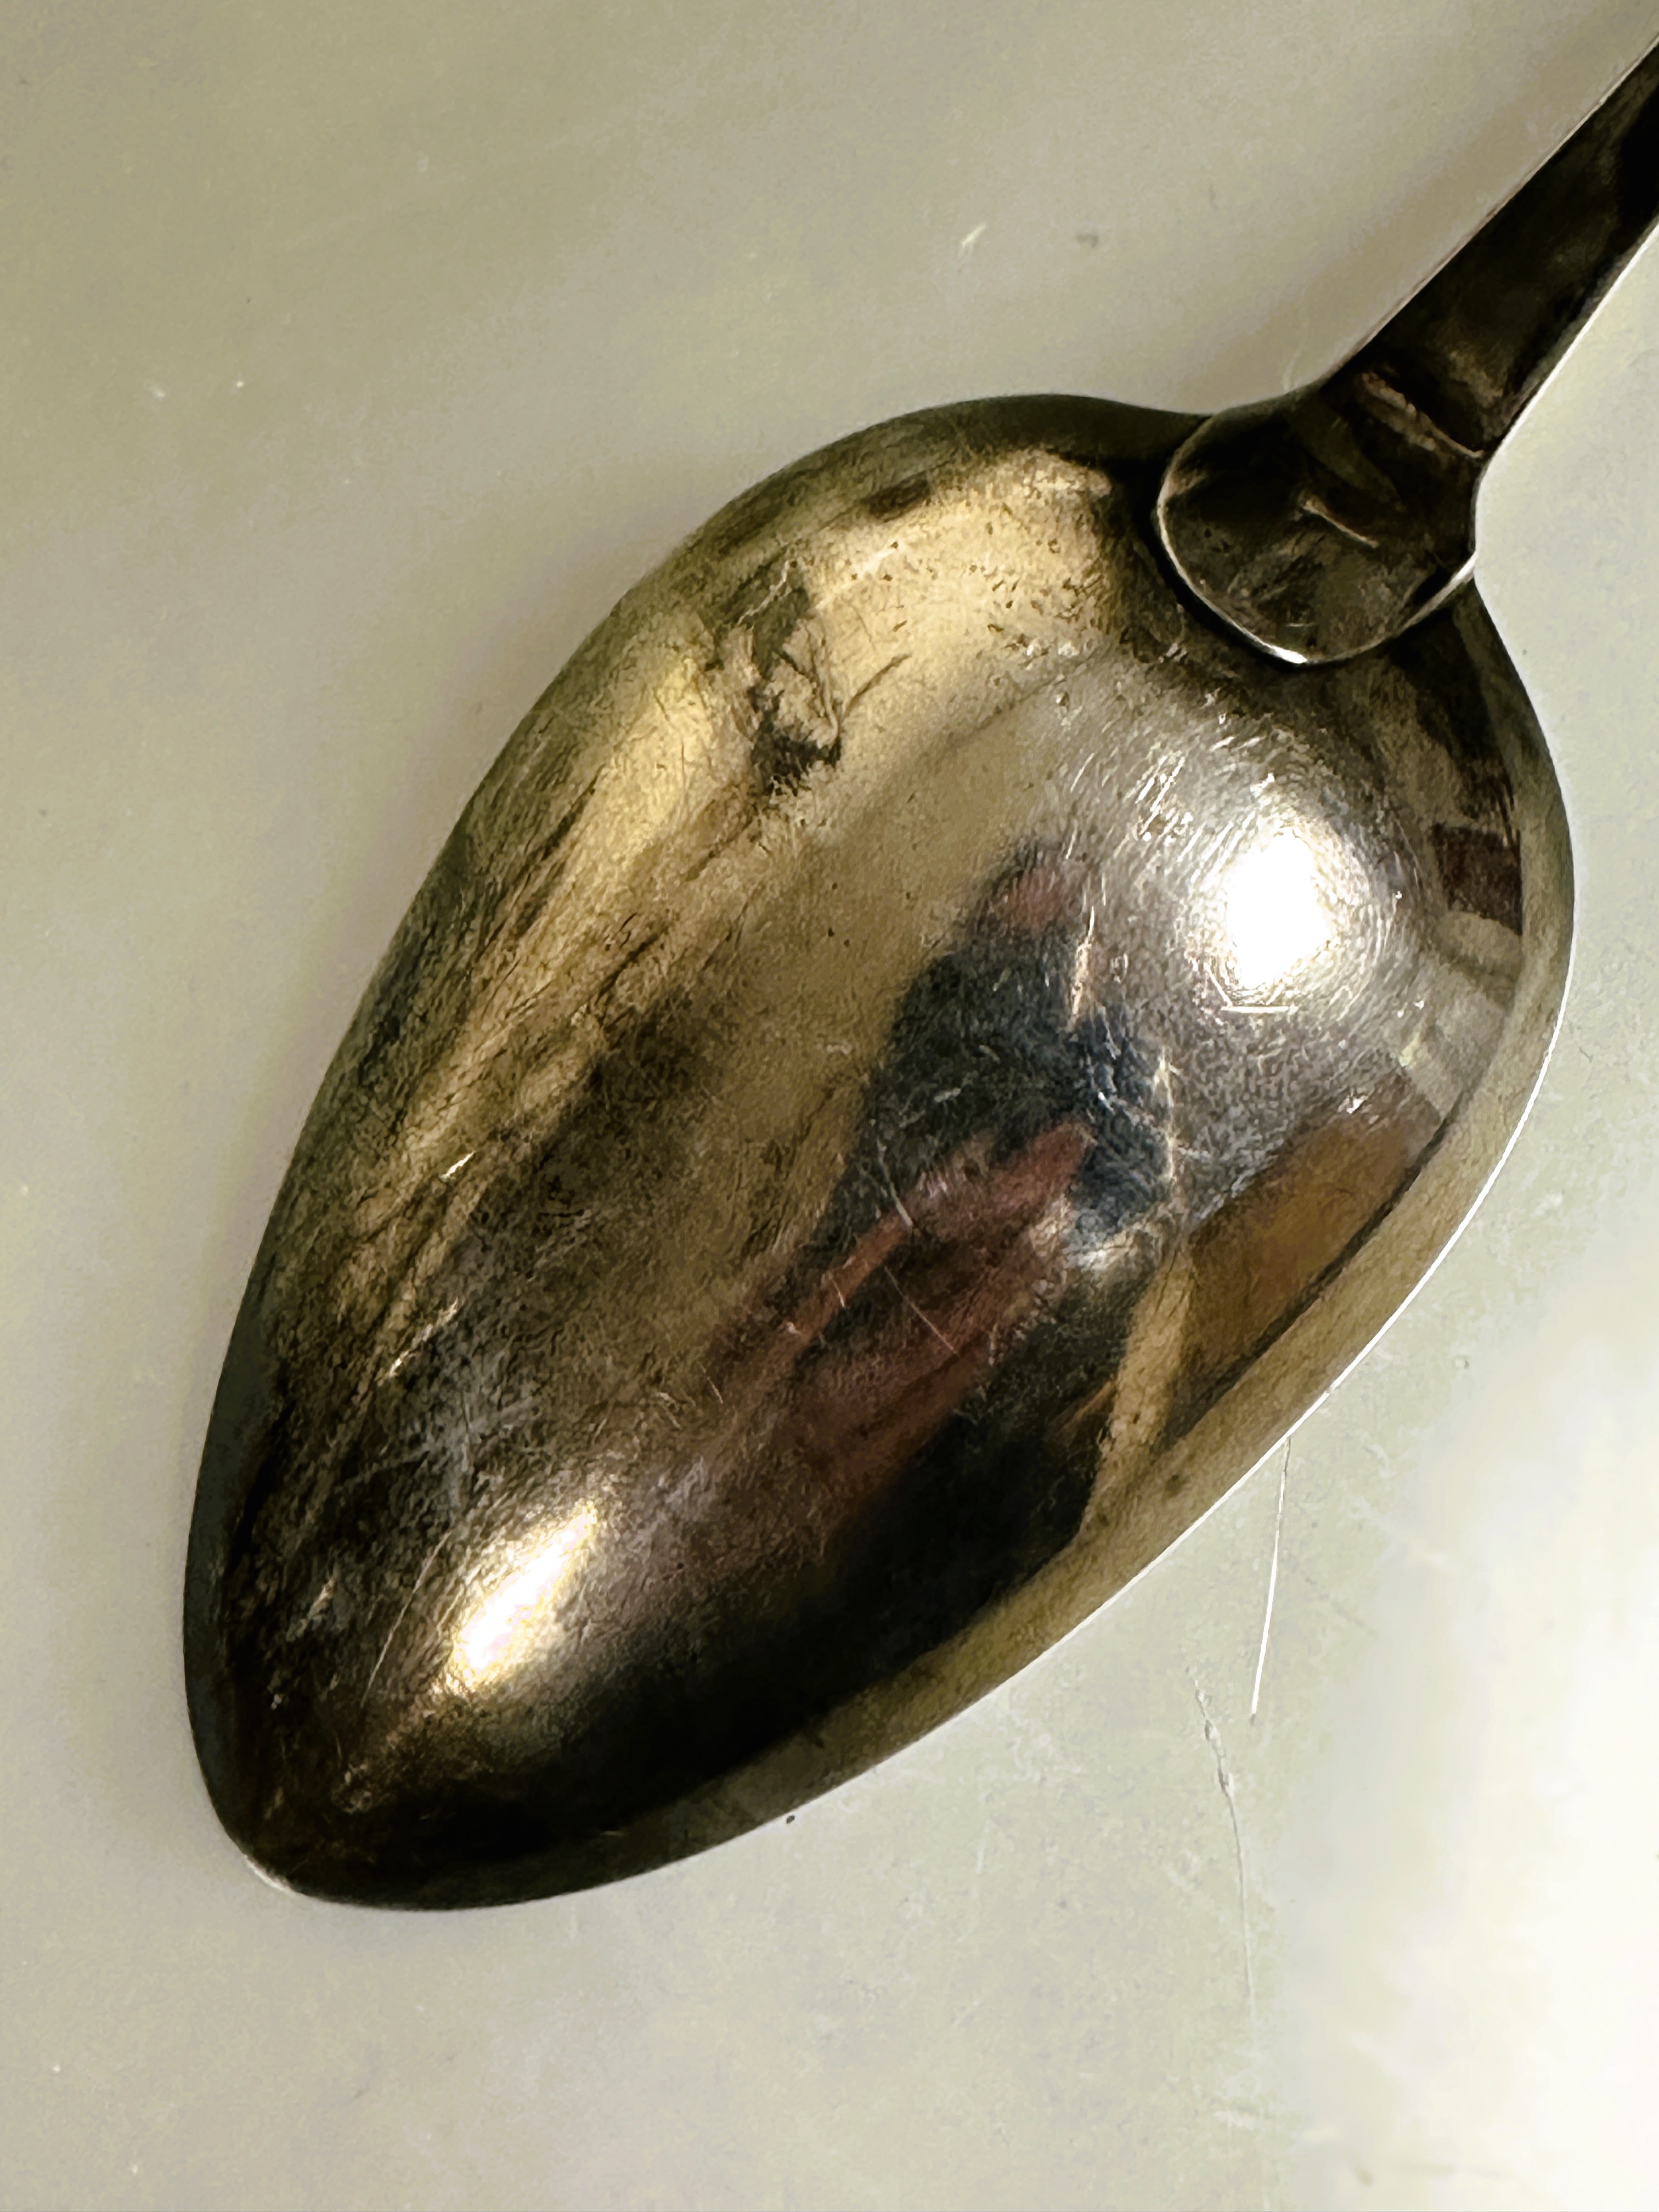 A George III Newcastle silver old English pattern basting spoon with engraved initial G L x 31.5cm - Image 4 of 5